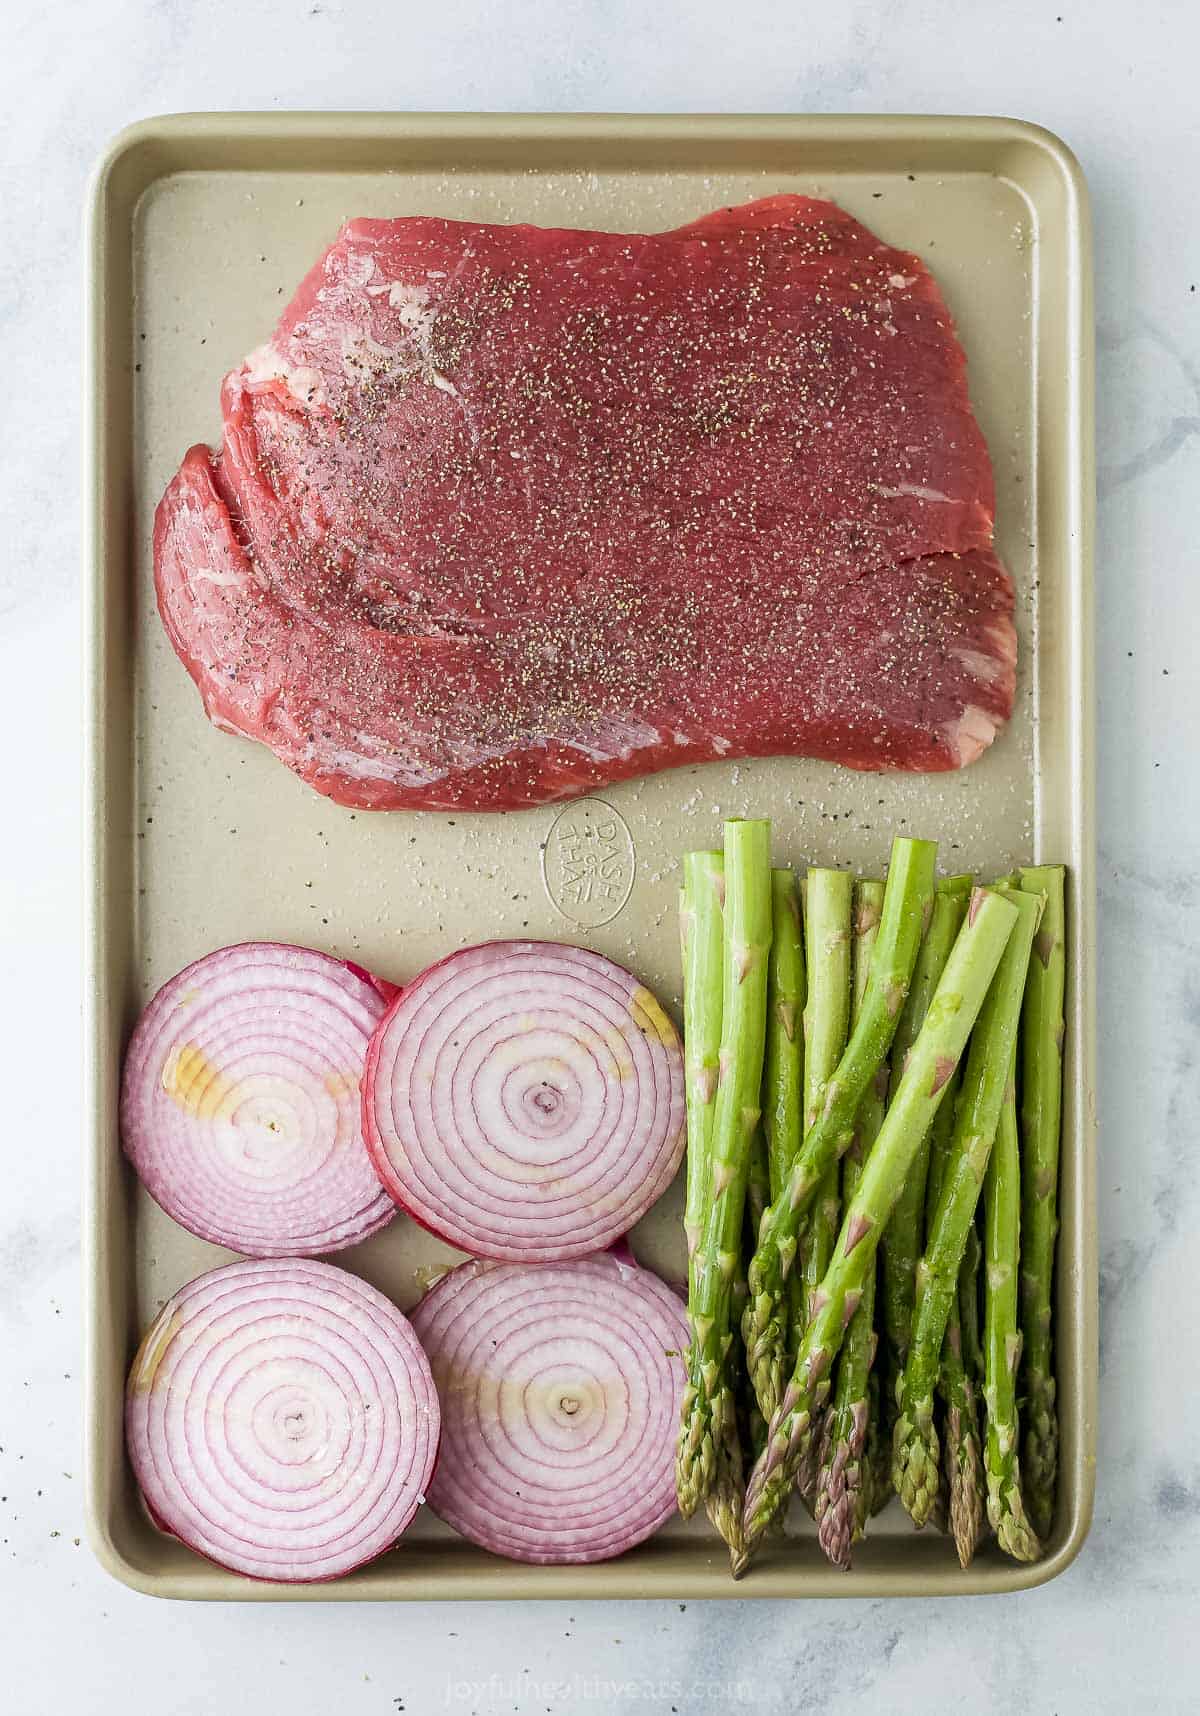 Raw beef on a cookie sheet with sliced red onions and fresh asparagus spears